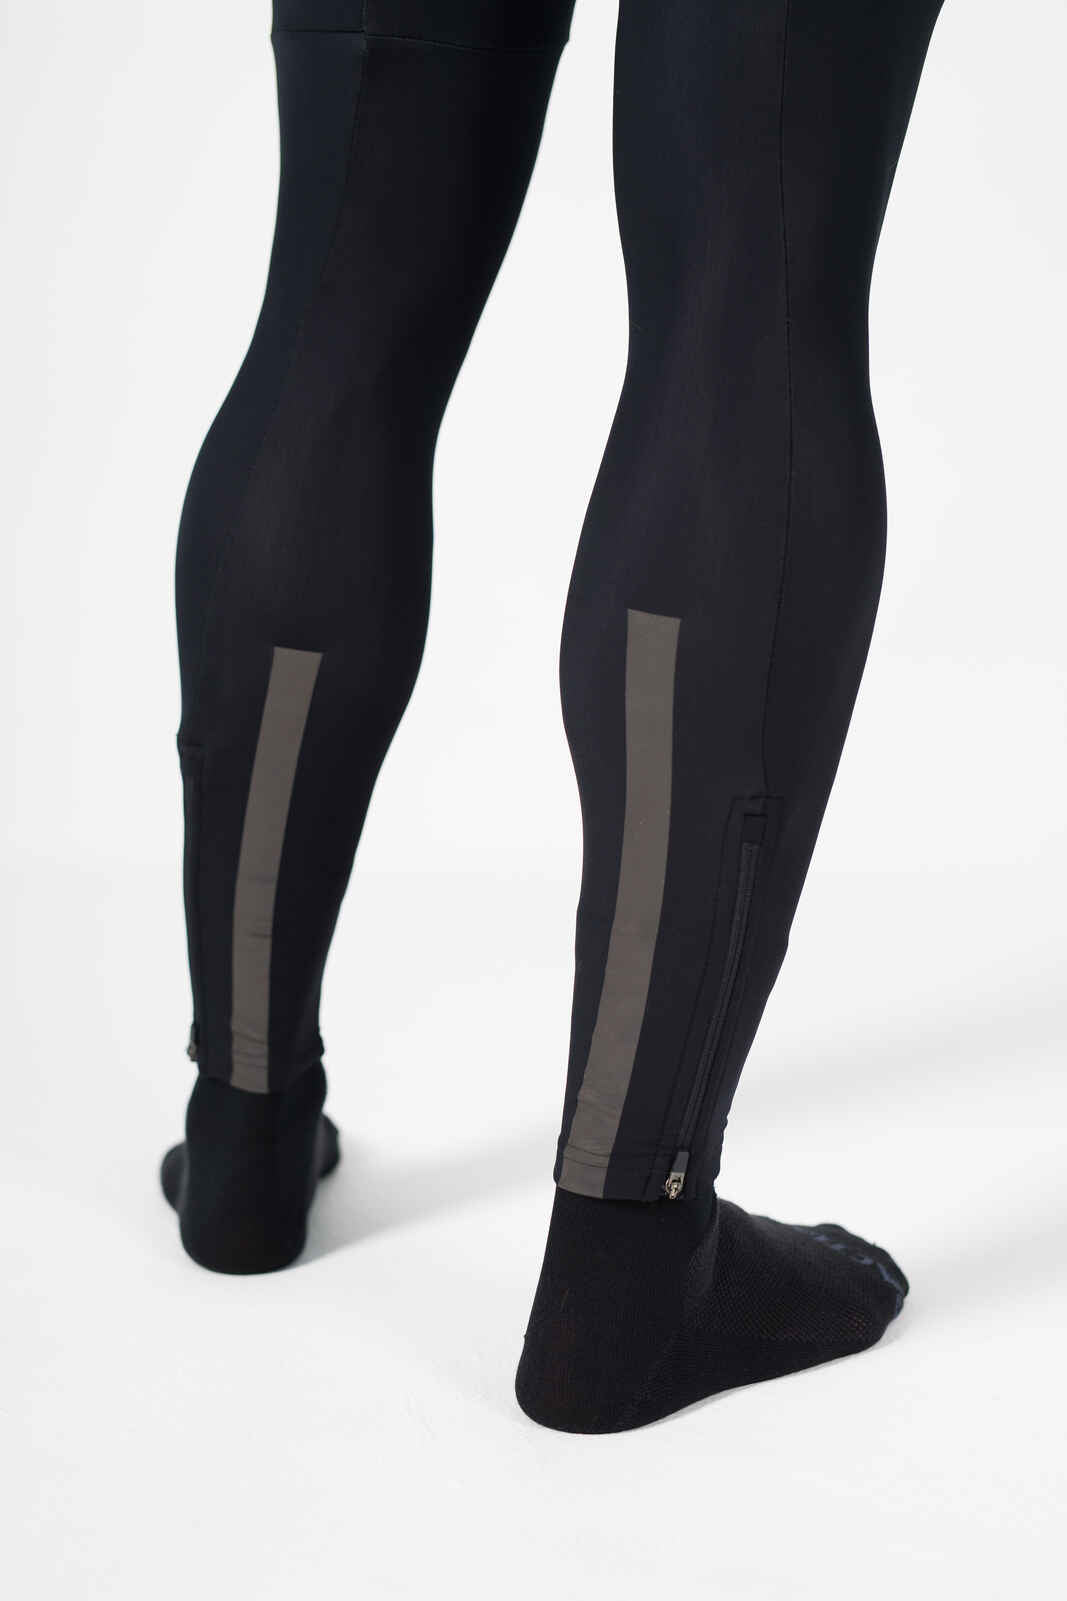 Thermal Bib Tights - Reflective Features on Back of Legs